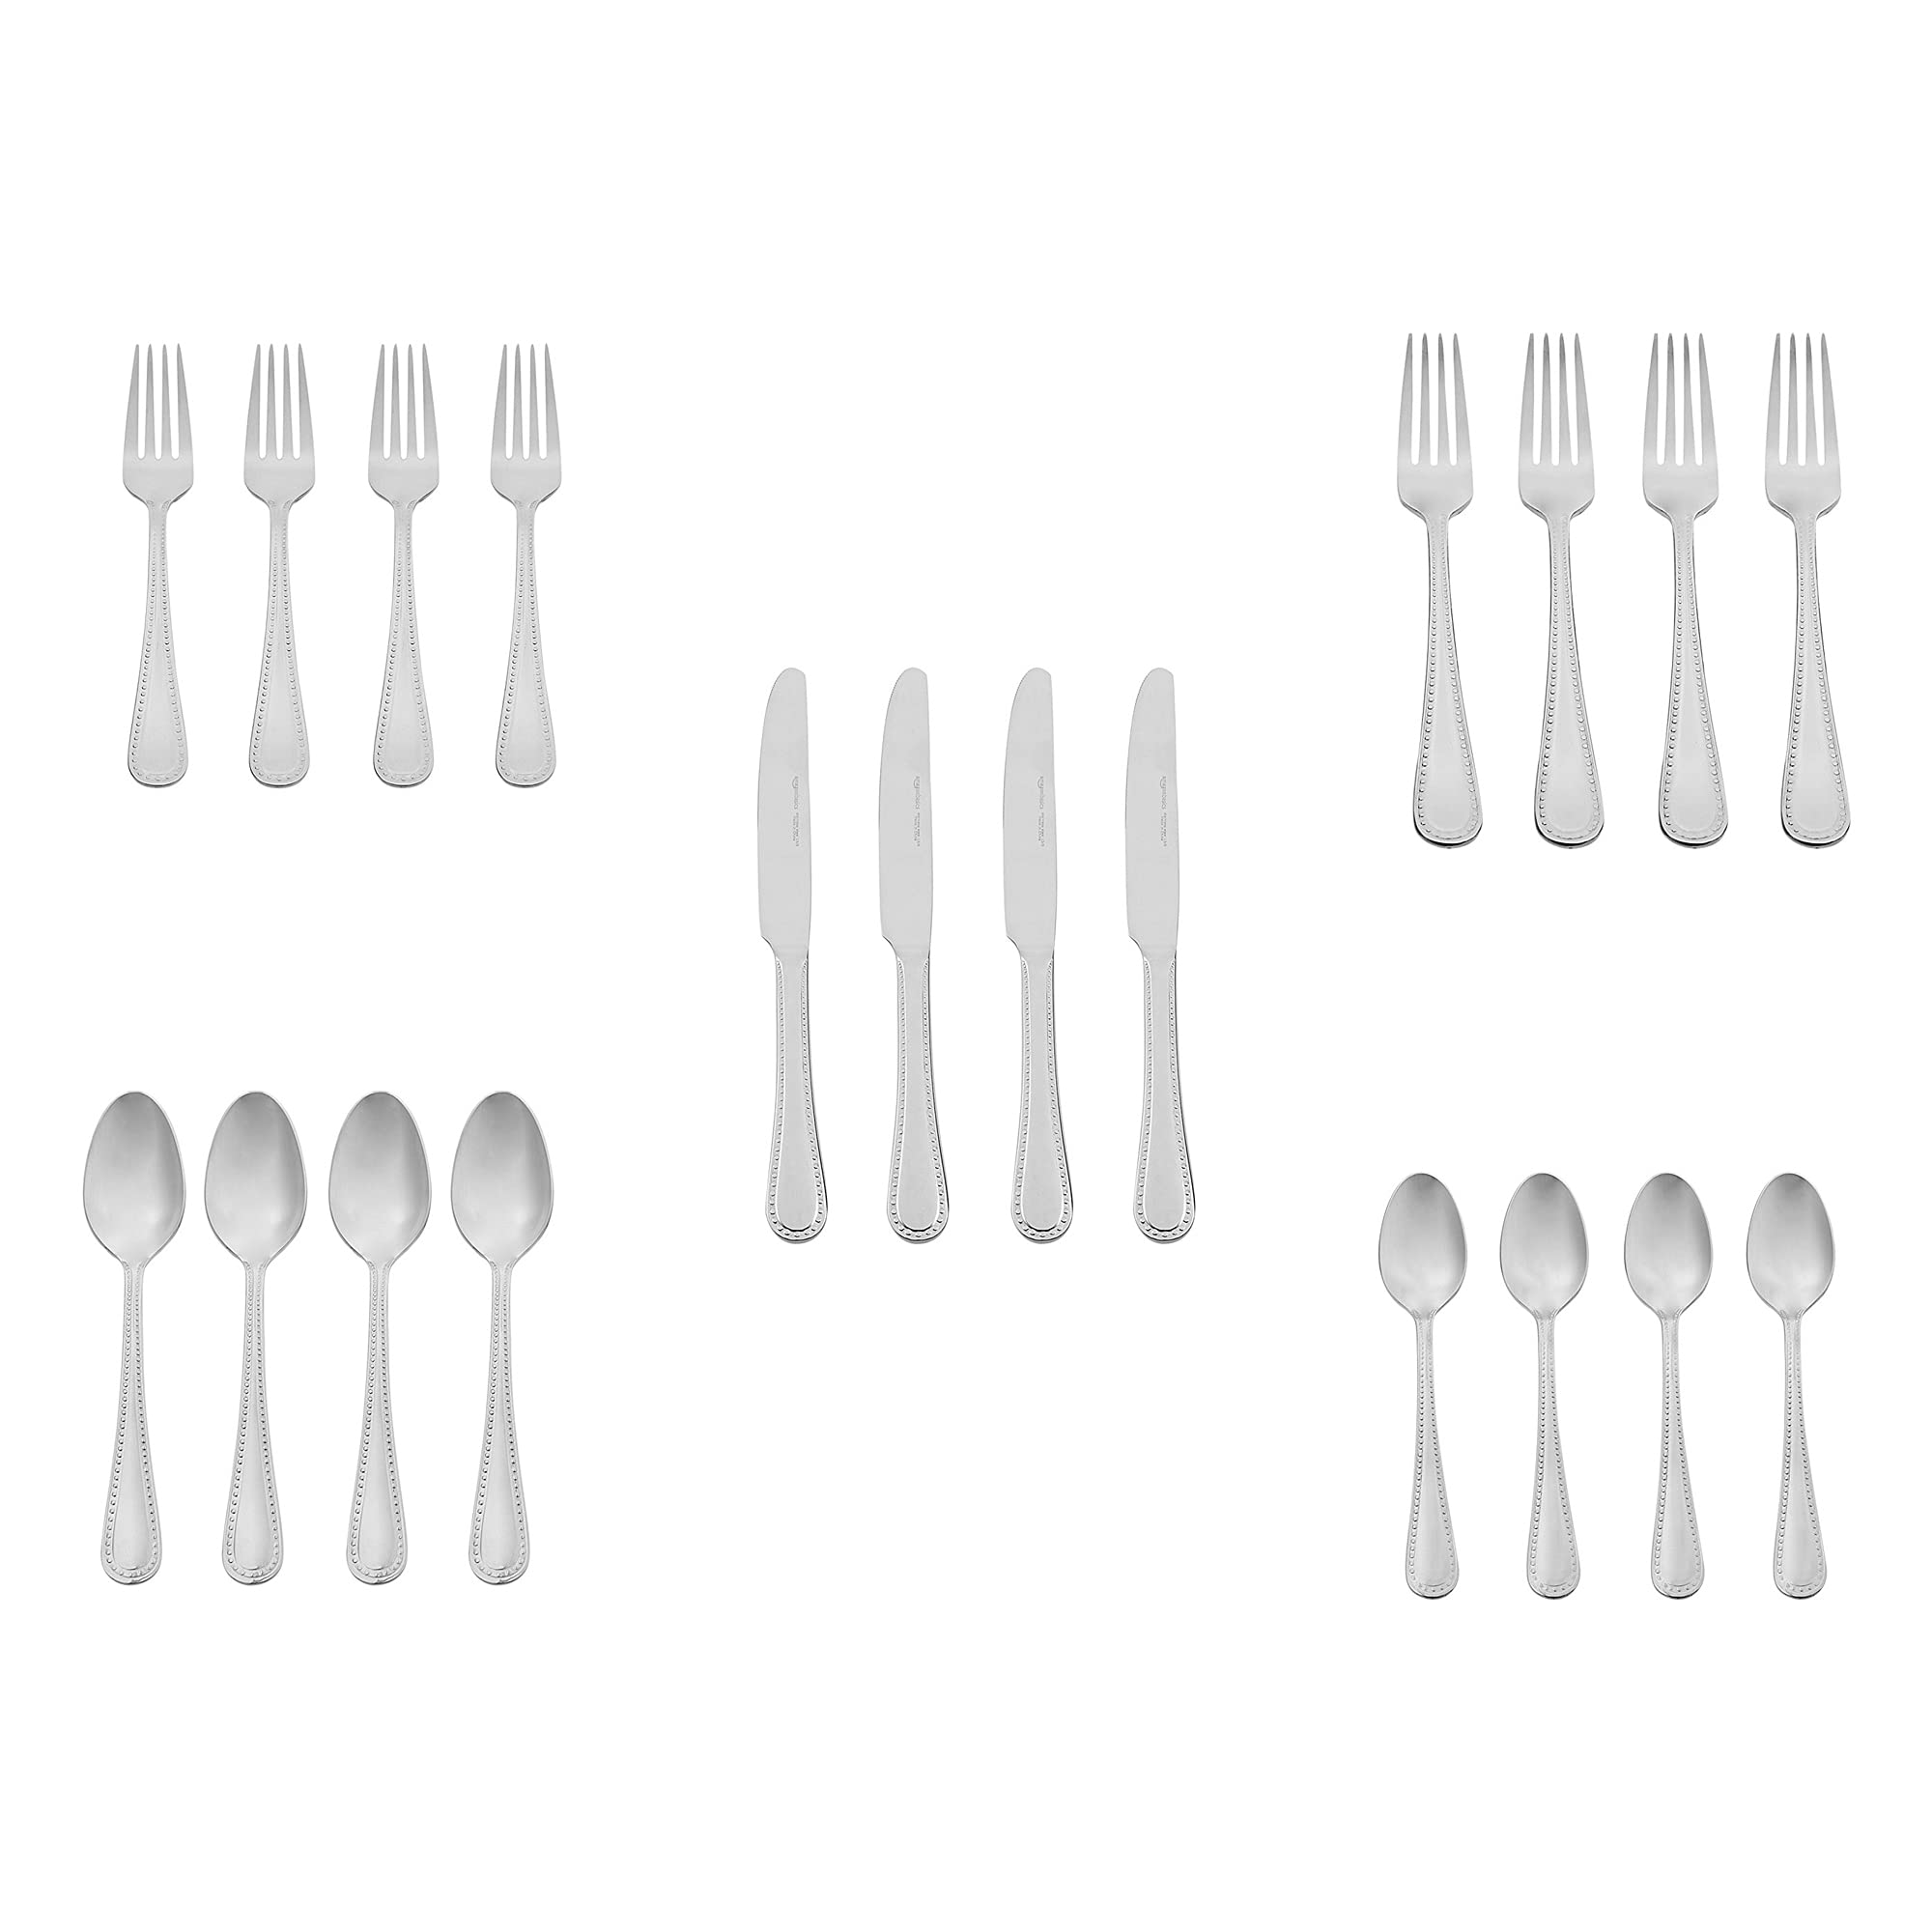 Amazon Basics 20-Piece Stainless Steel Flatware Set with Pearled Edge, Service for 4, Silver